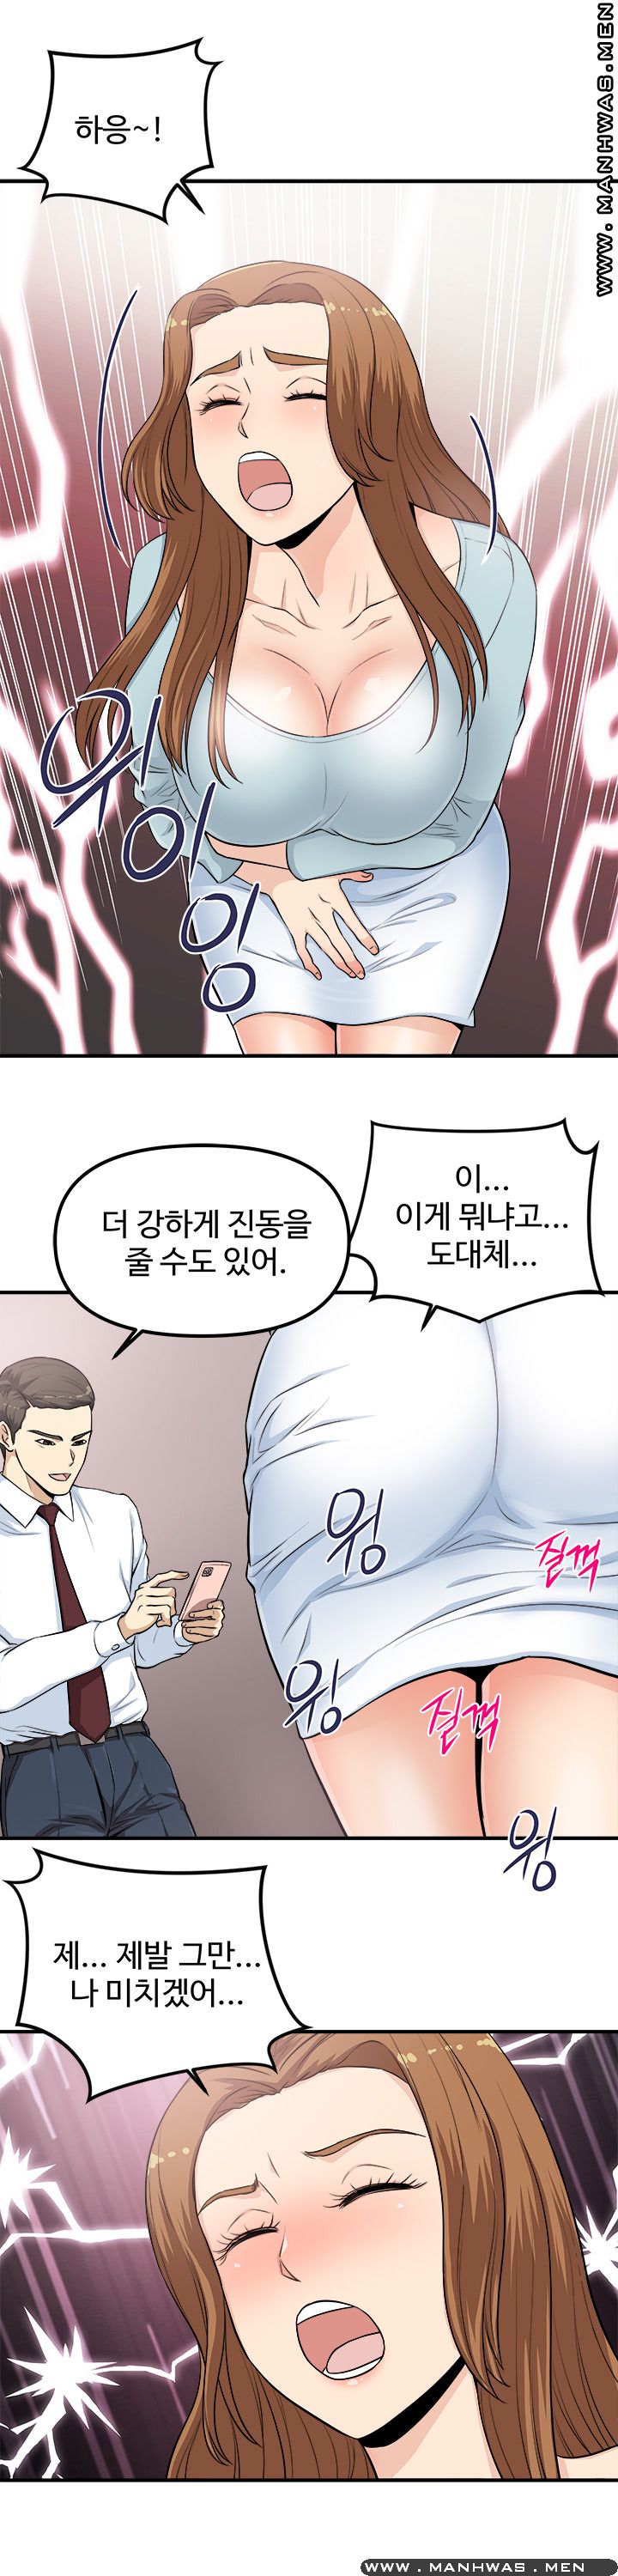 Office Bible Raw - Chapter 5 Page 11